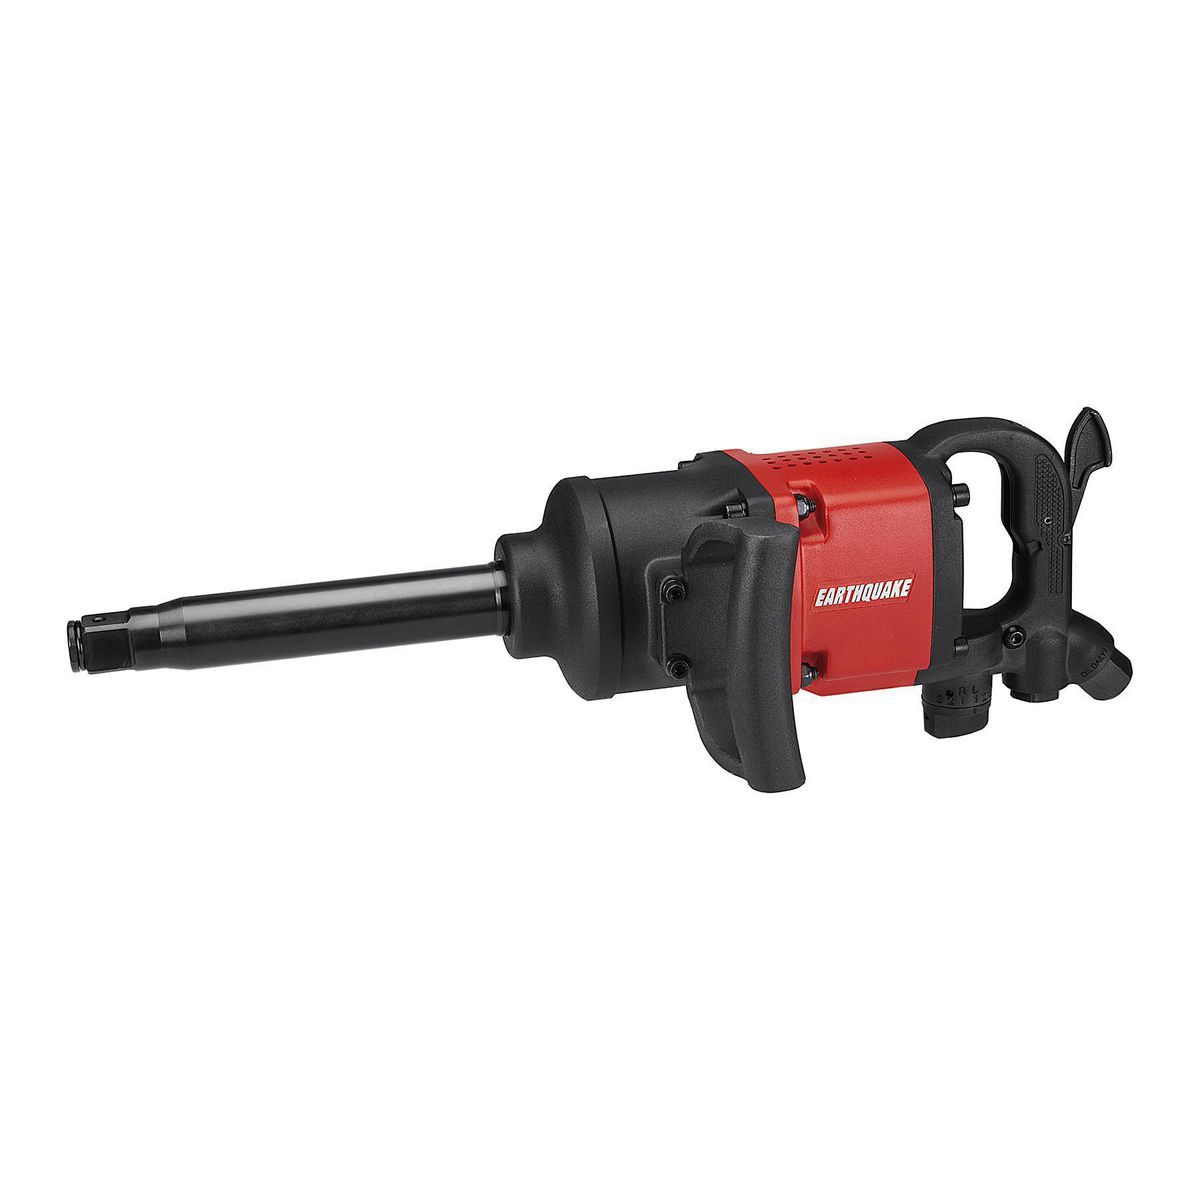 EARTHQUAKE 1 in. D-Handle Aluminum Air Impact Wrench, 8 in. Extended Anvil, Pinless, 2500 ft. lbs.